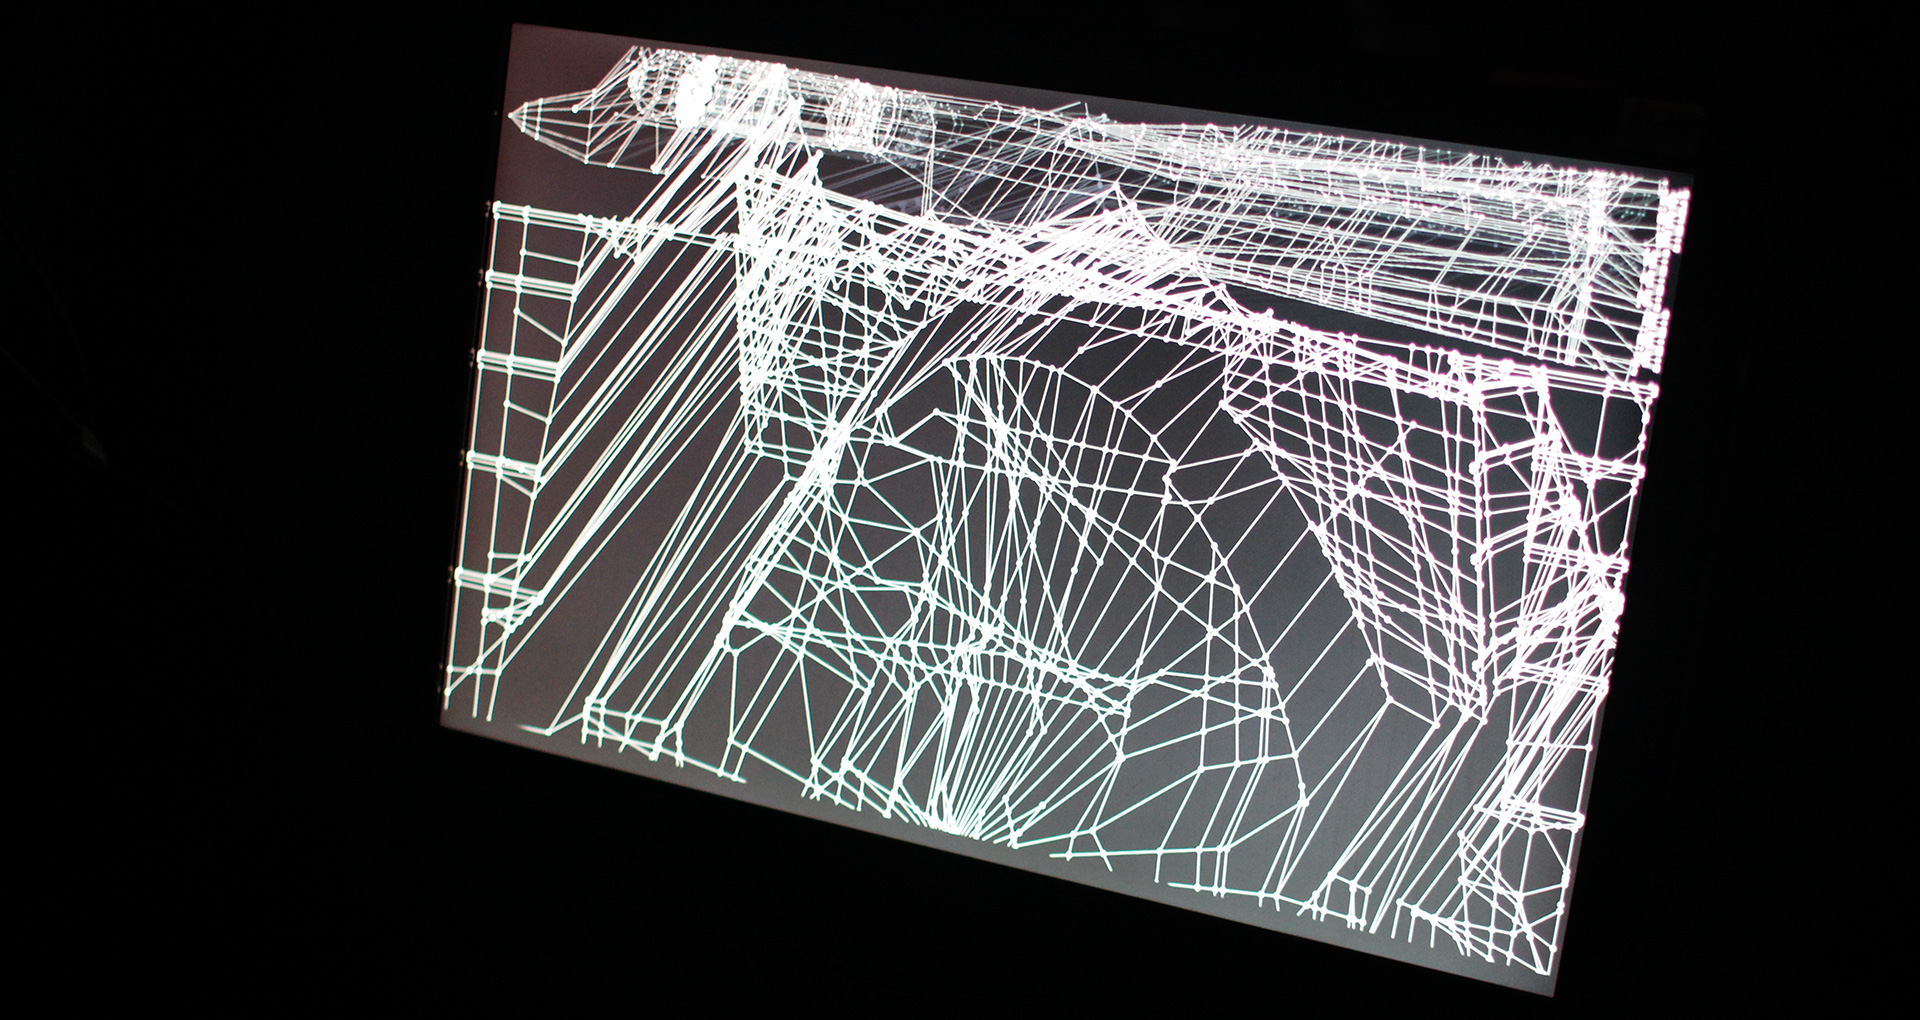 a display which show the grid of the projection